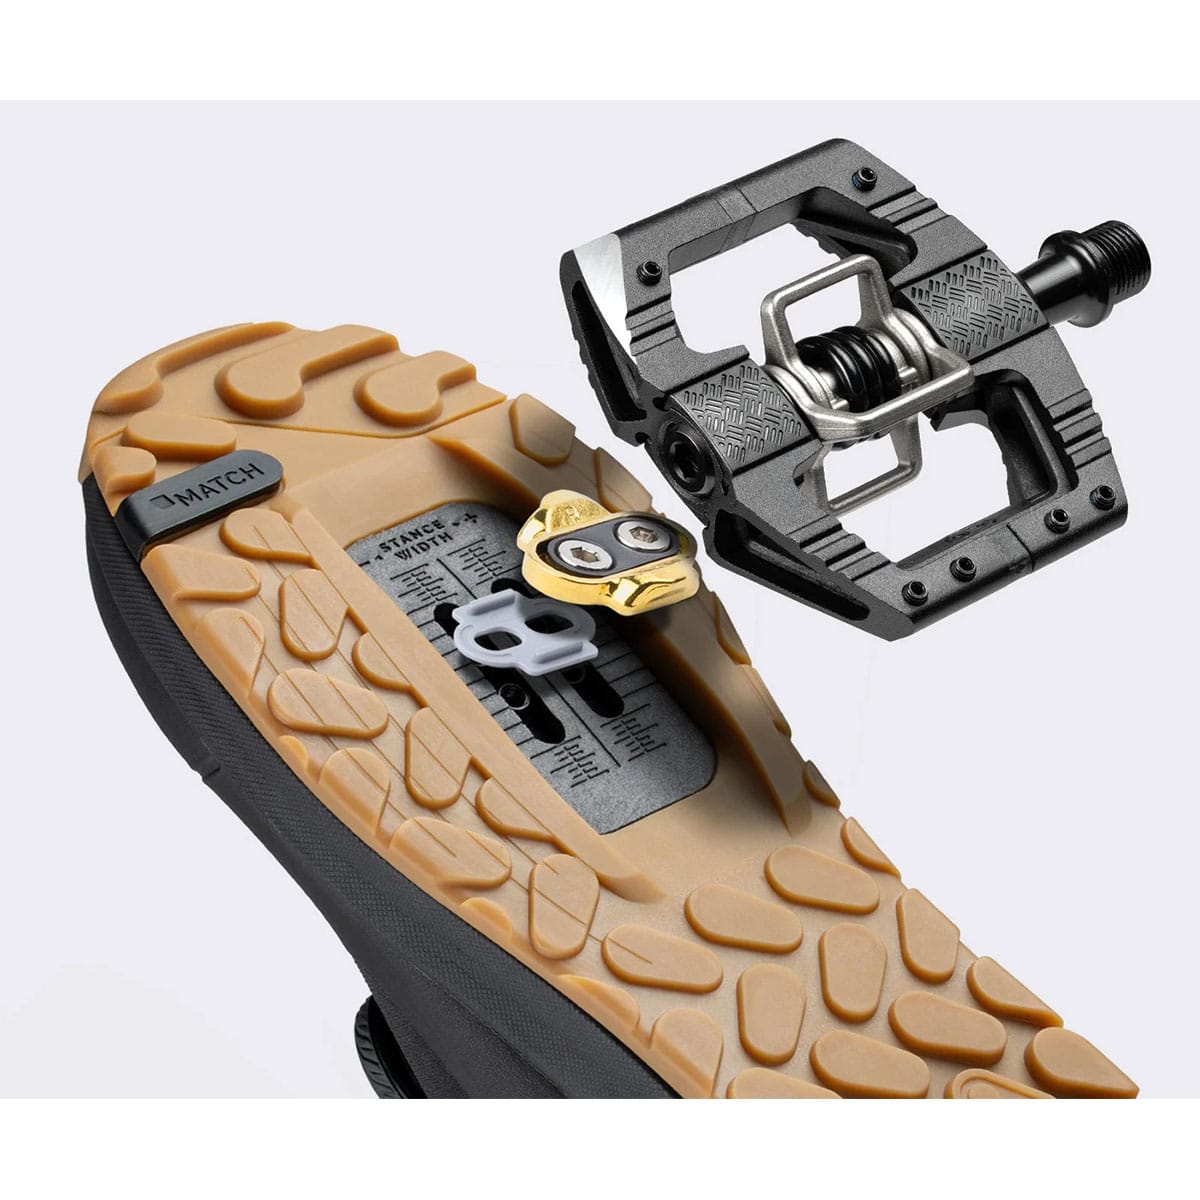 Chaussures VTT CRANKBROTHERS MALLET TRAIL BOA Noir/Or